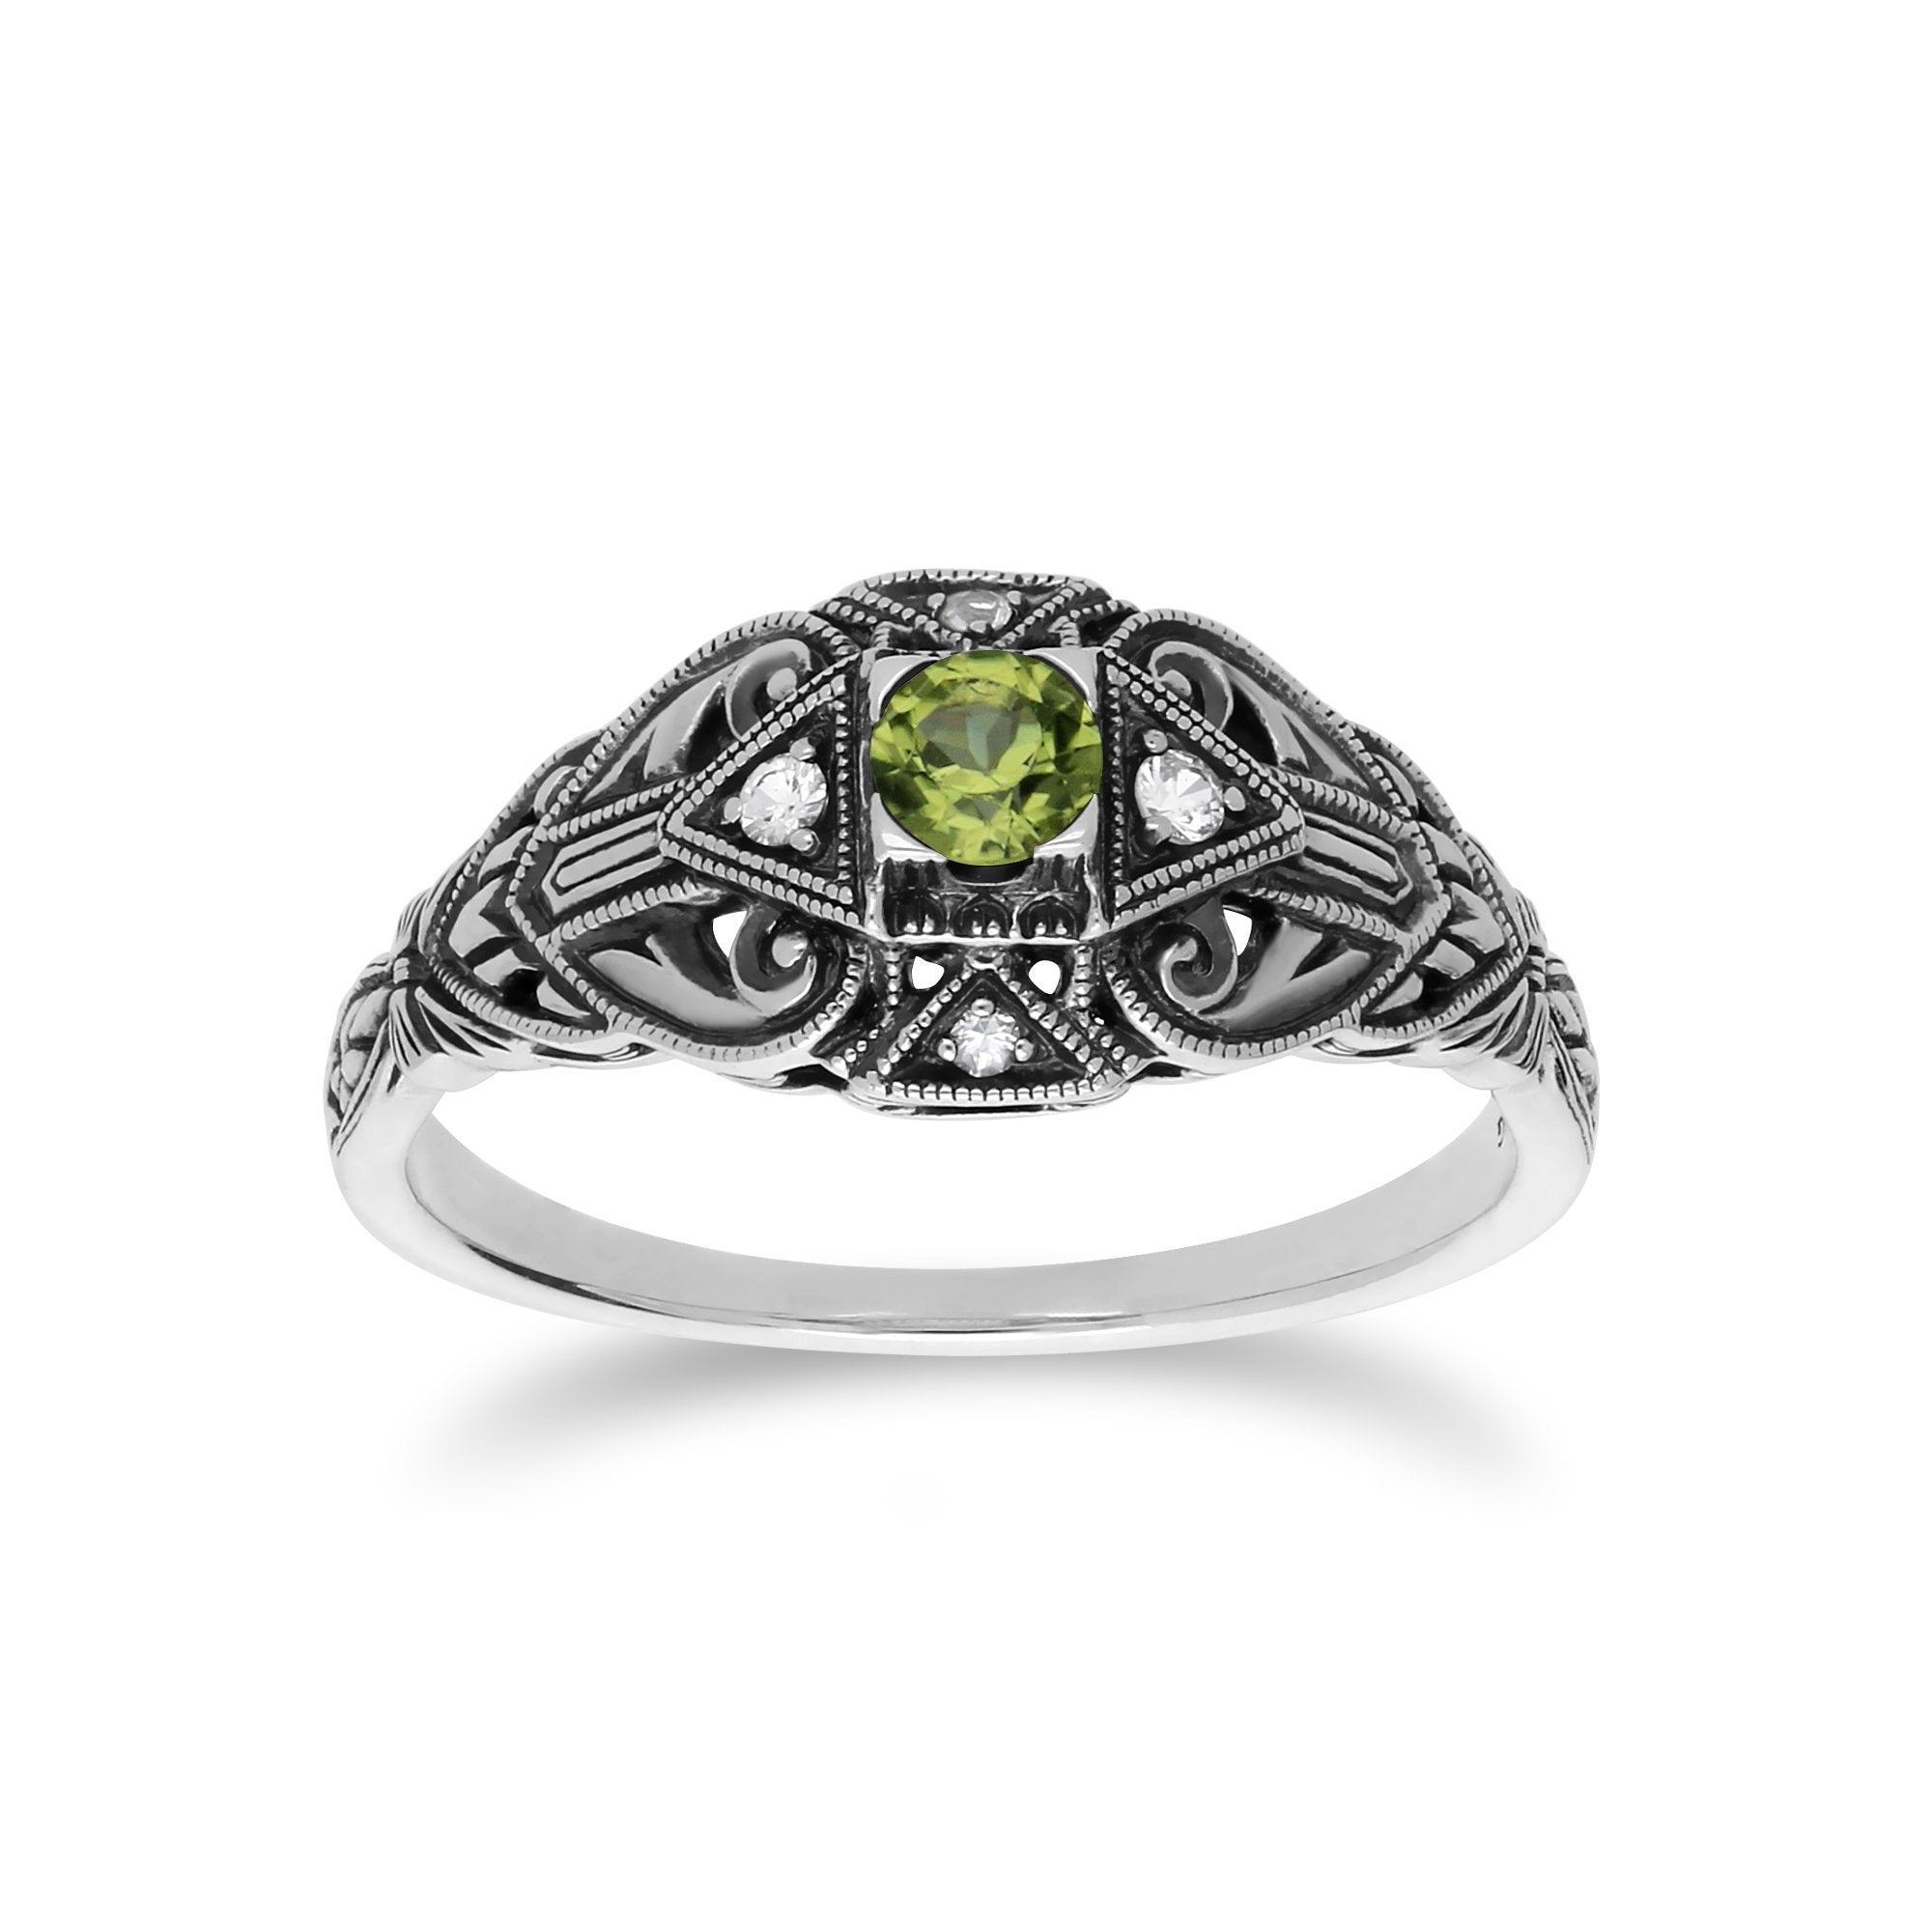 Art Deco Style Round Peridot & White Topaz  Ring in 925 Sterling Silver